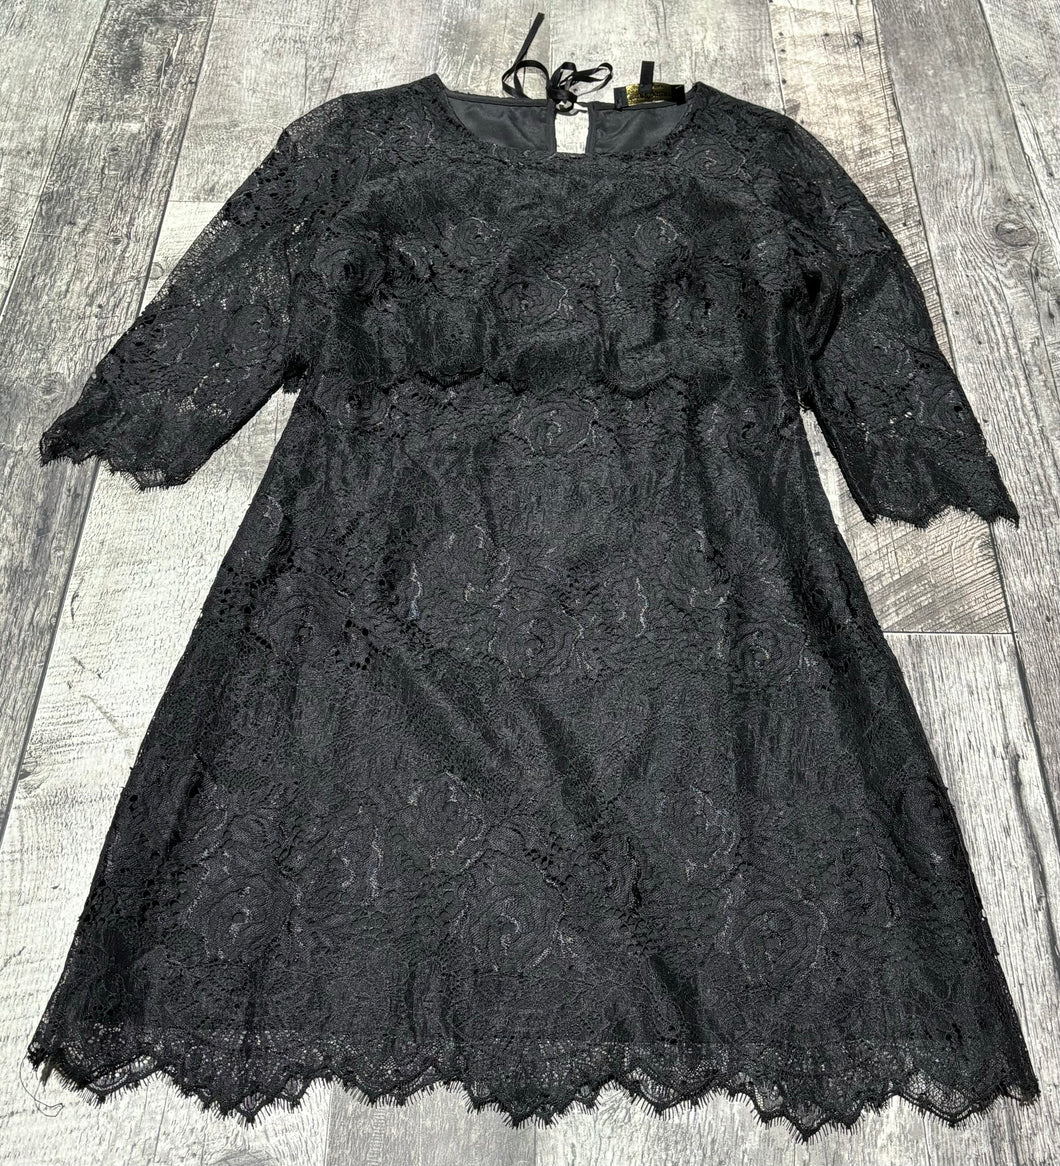 Juicy Couture black lace half sleeve dress - Hers size 2